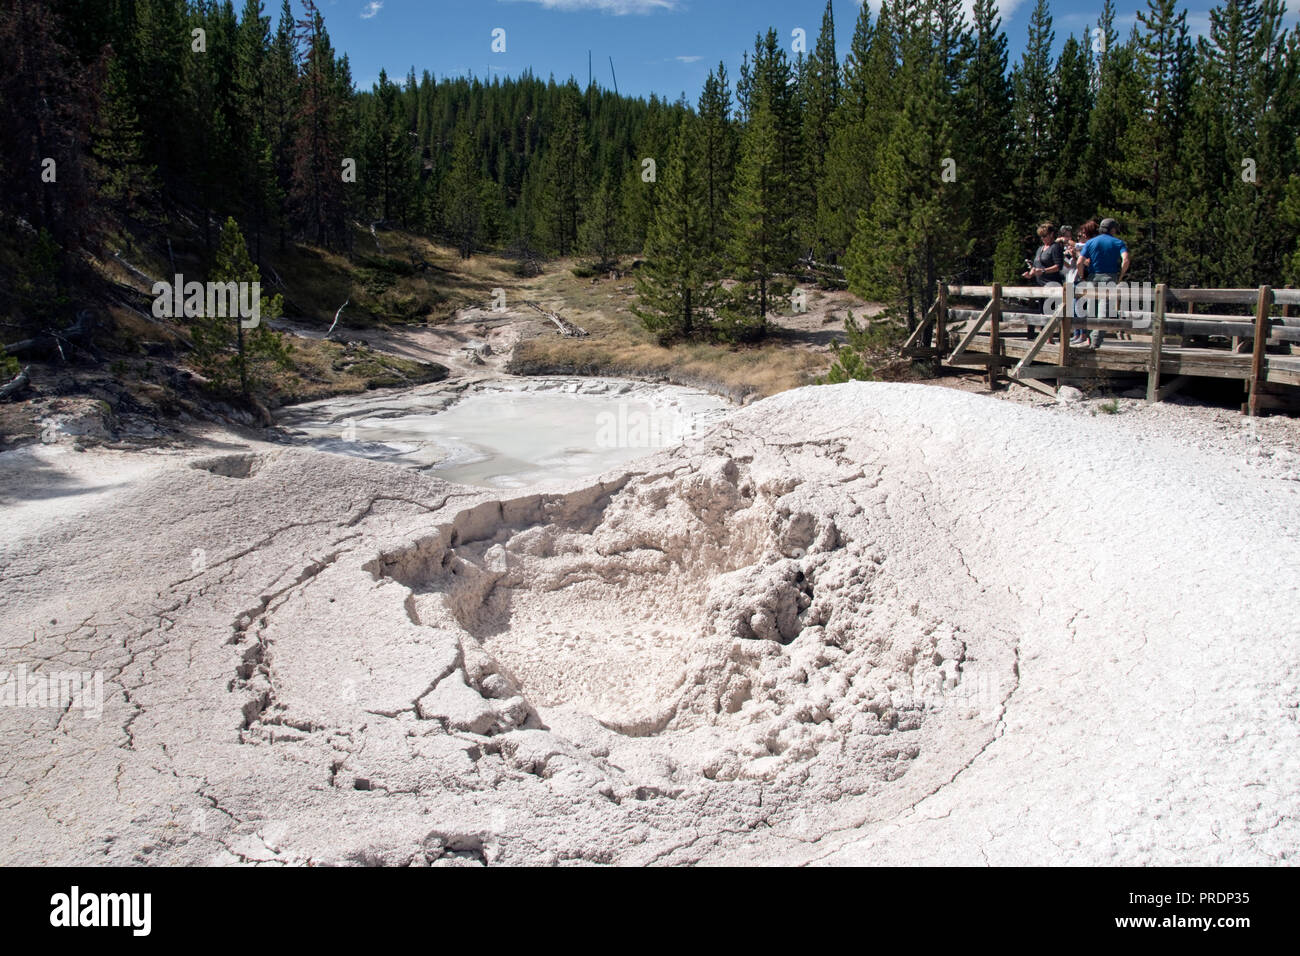 Tourists view the Artists Paintpots, a bubbling pool of hot mud, south of Norris Geyser Basin in Yellowstone Nat. Park, Wyoming. Stock Photo